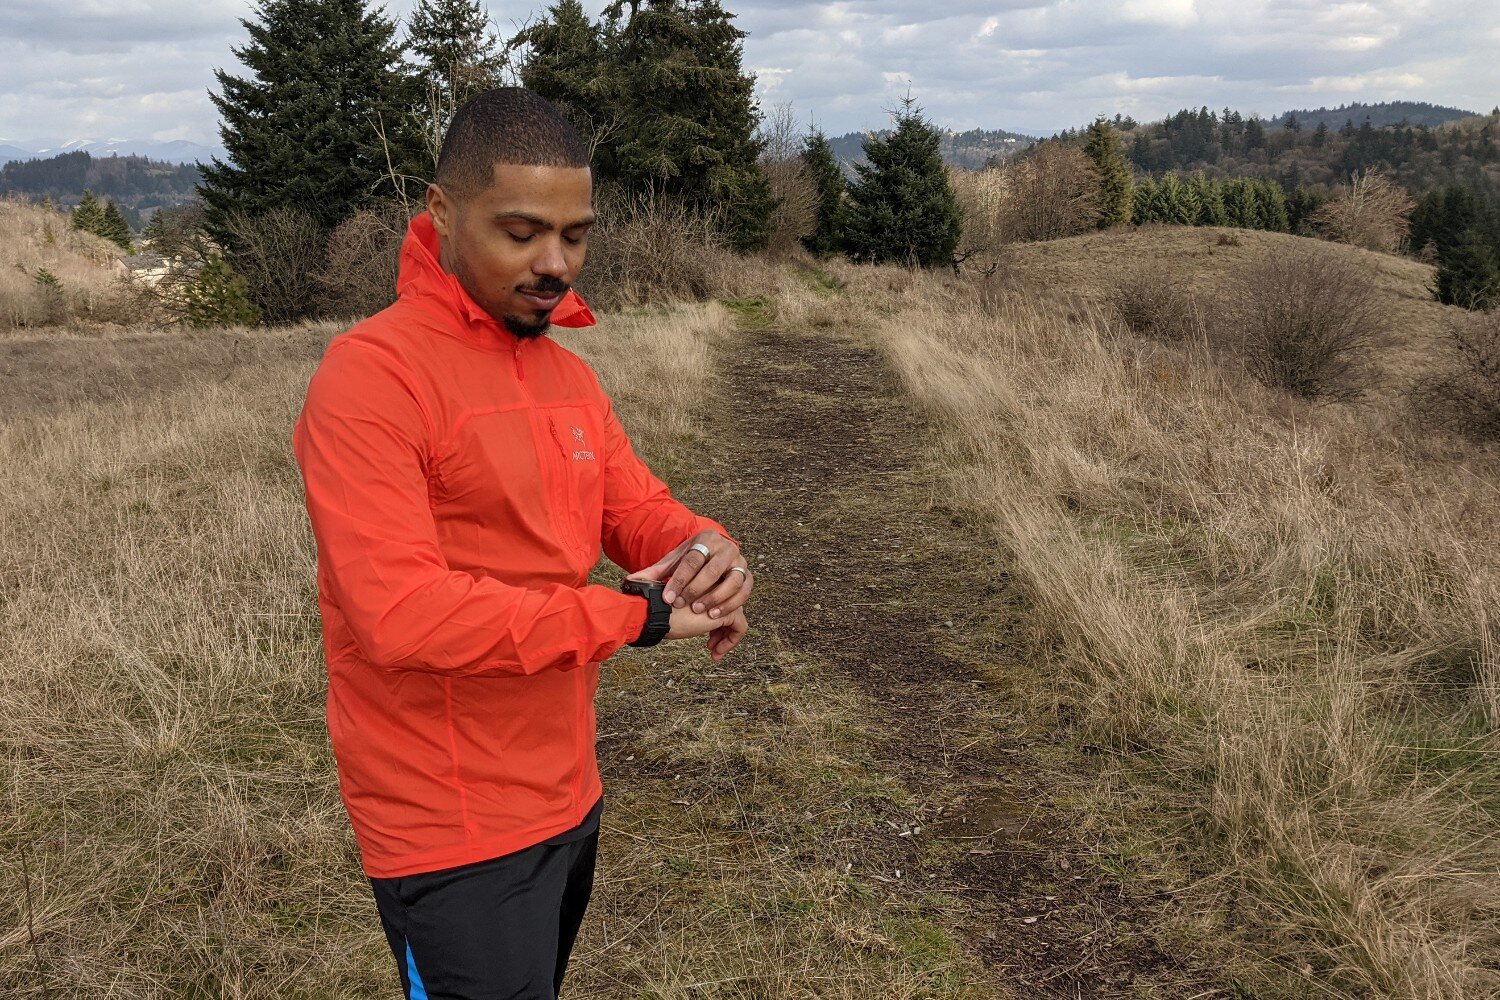 A runner looking at a GPS watch on his wrist